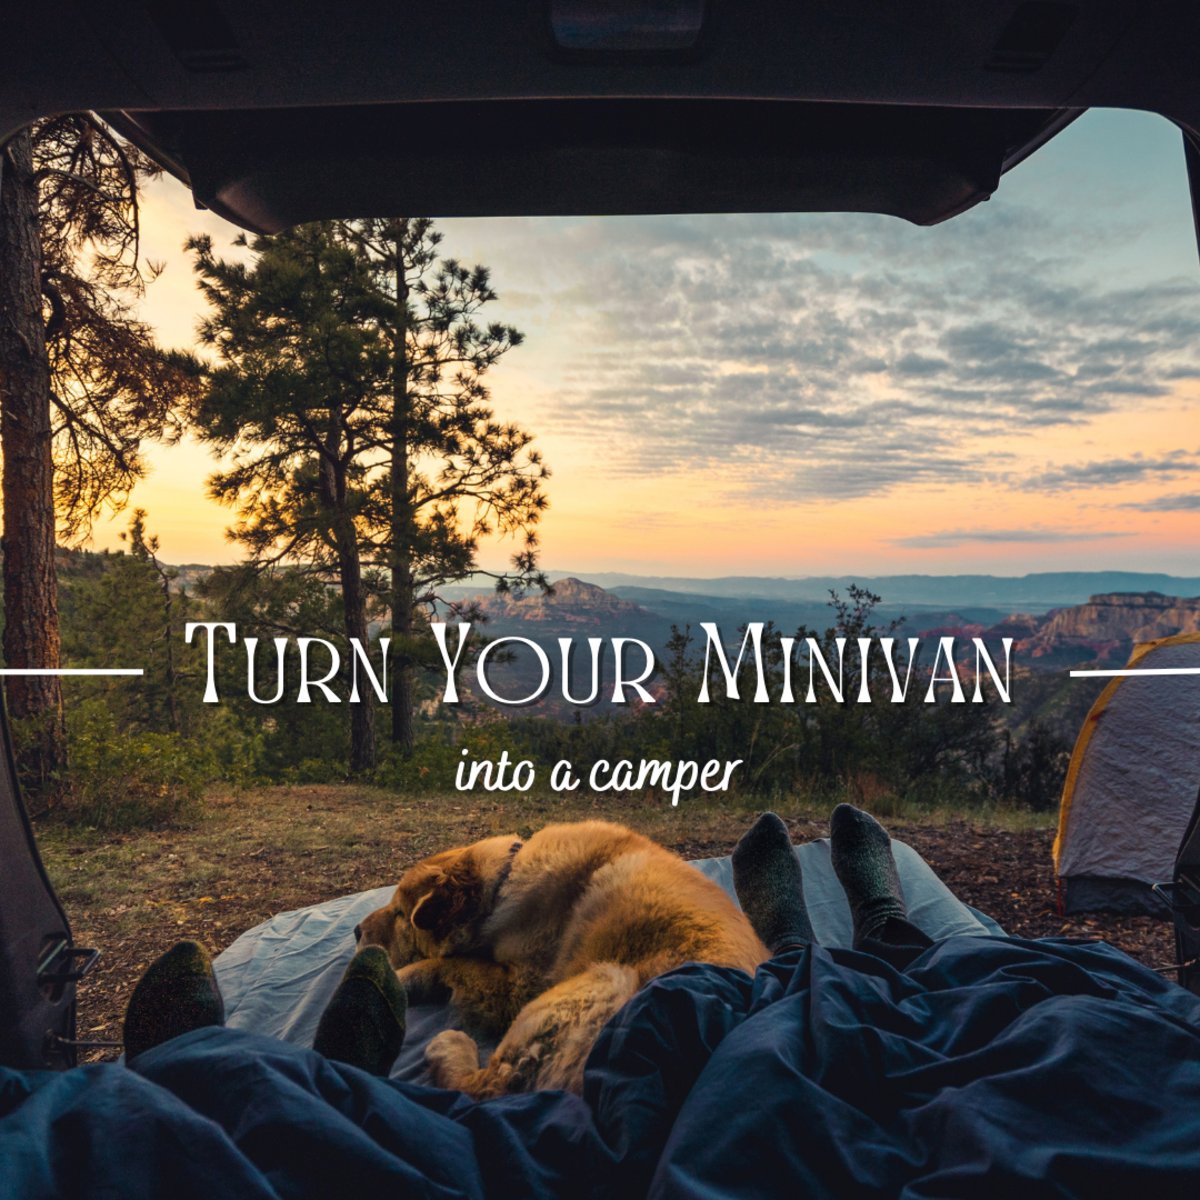 Have a minivan? Let's go camping!